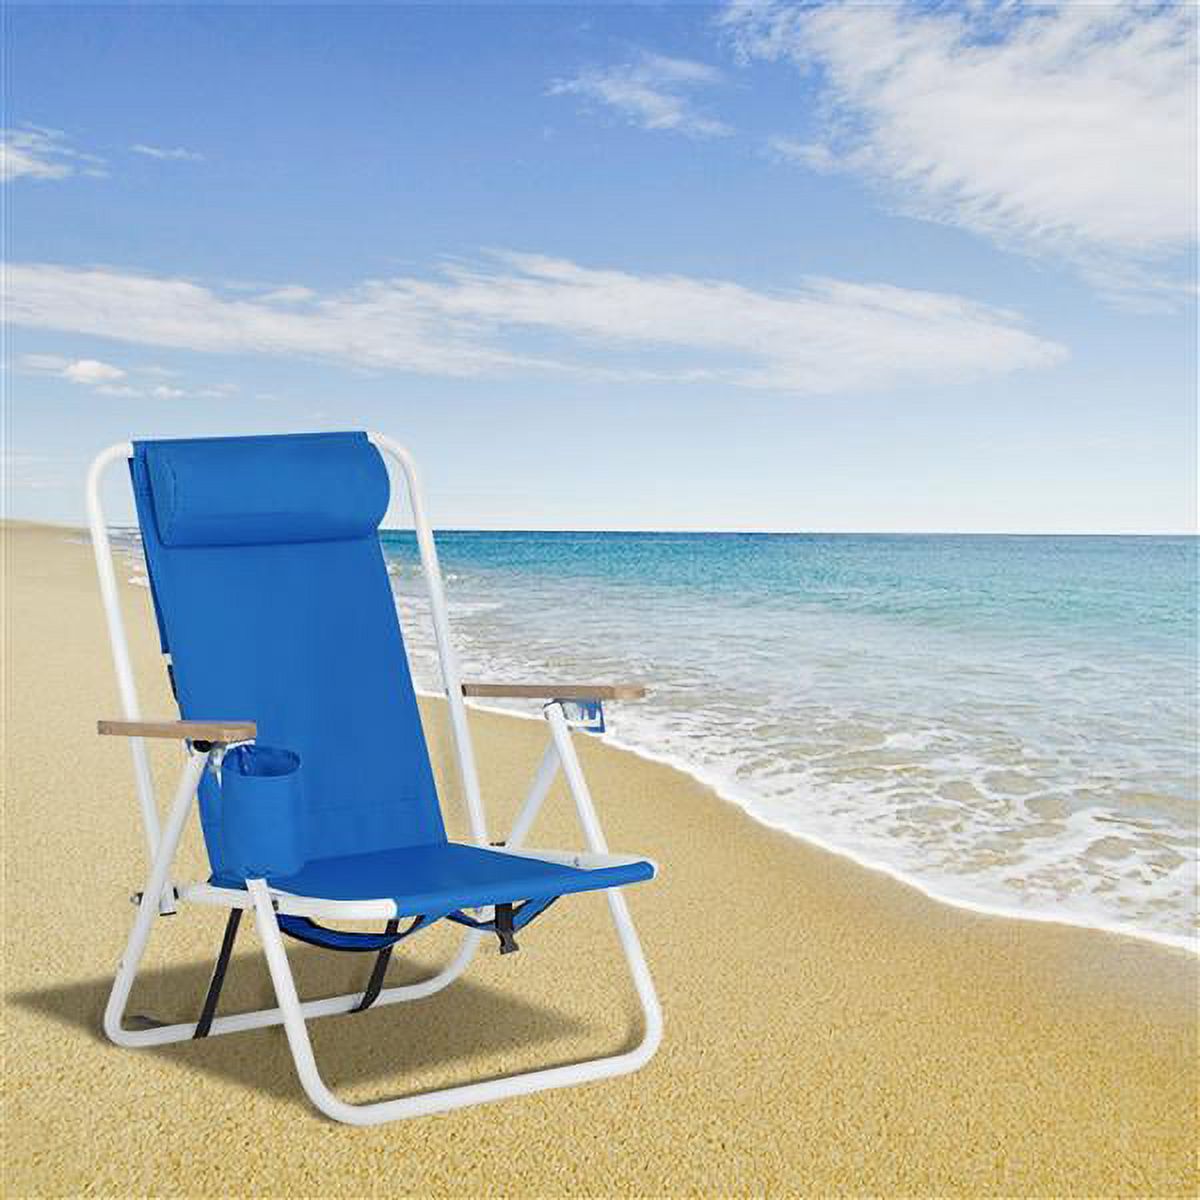 Clearance!  5 PCAKS Folding Lounge Chair,Portable High Beach Chair,Patio Folding Lightweight Camping Chair, Outdoor Garden Park Pool Side Lounge Chair, with Cup Holder, Adjustable Headrest, Blue - image 2 of 7